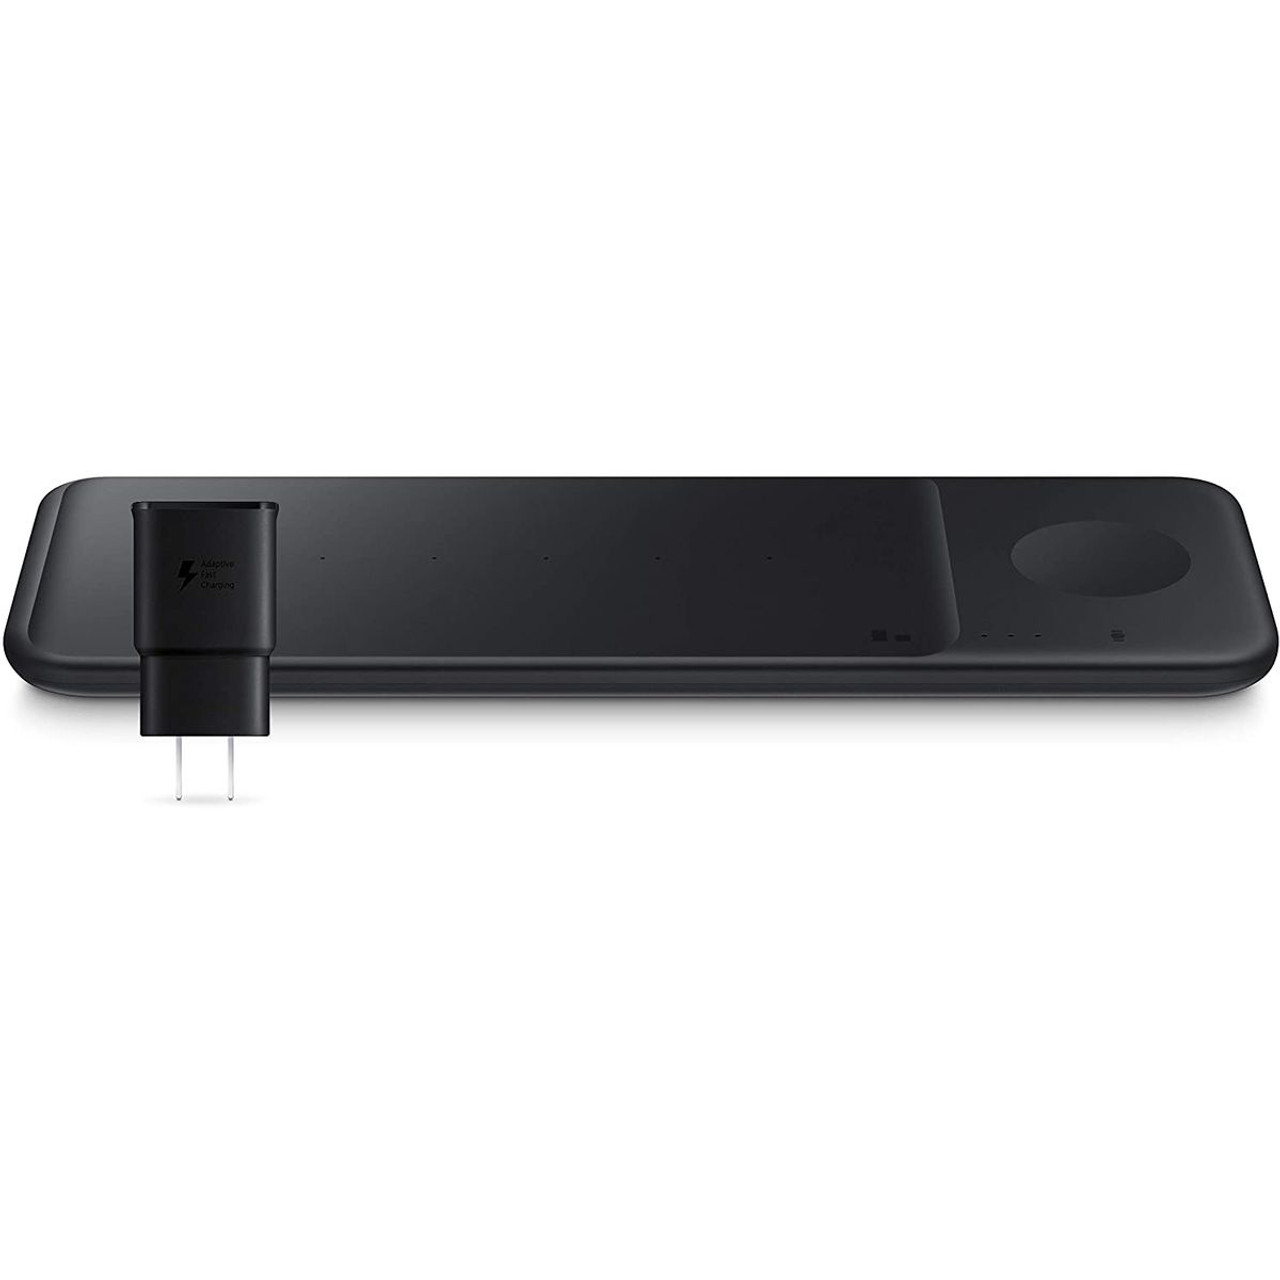 Samsung Wireless Charger Trio product image